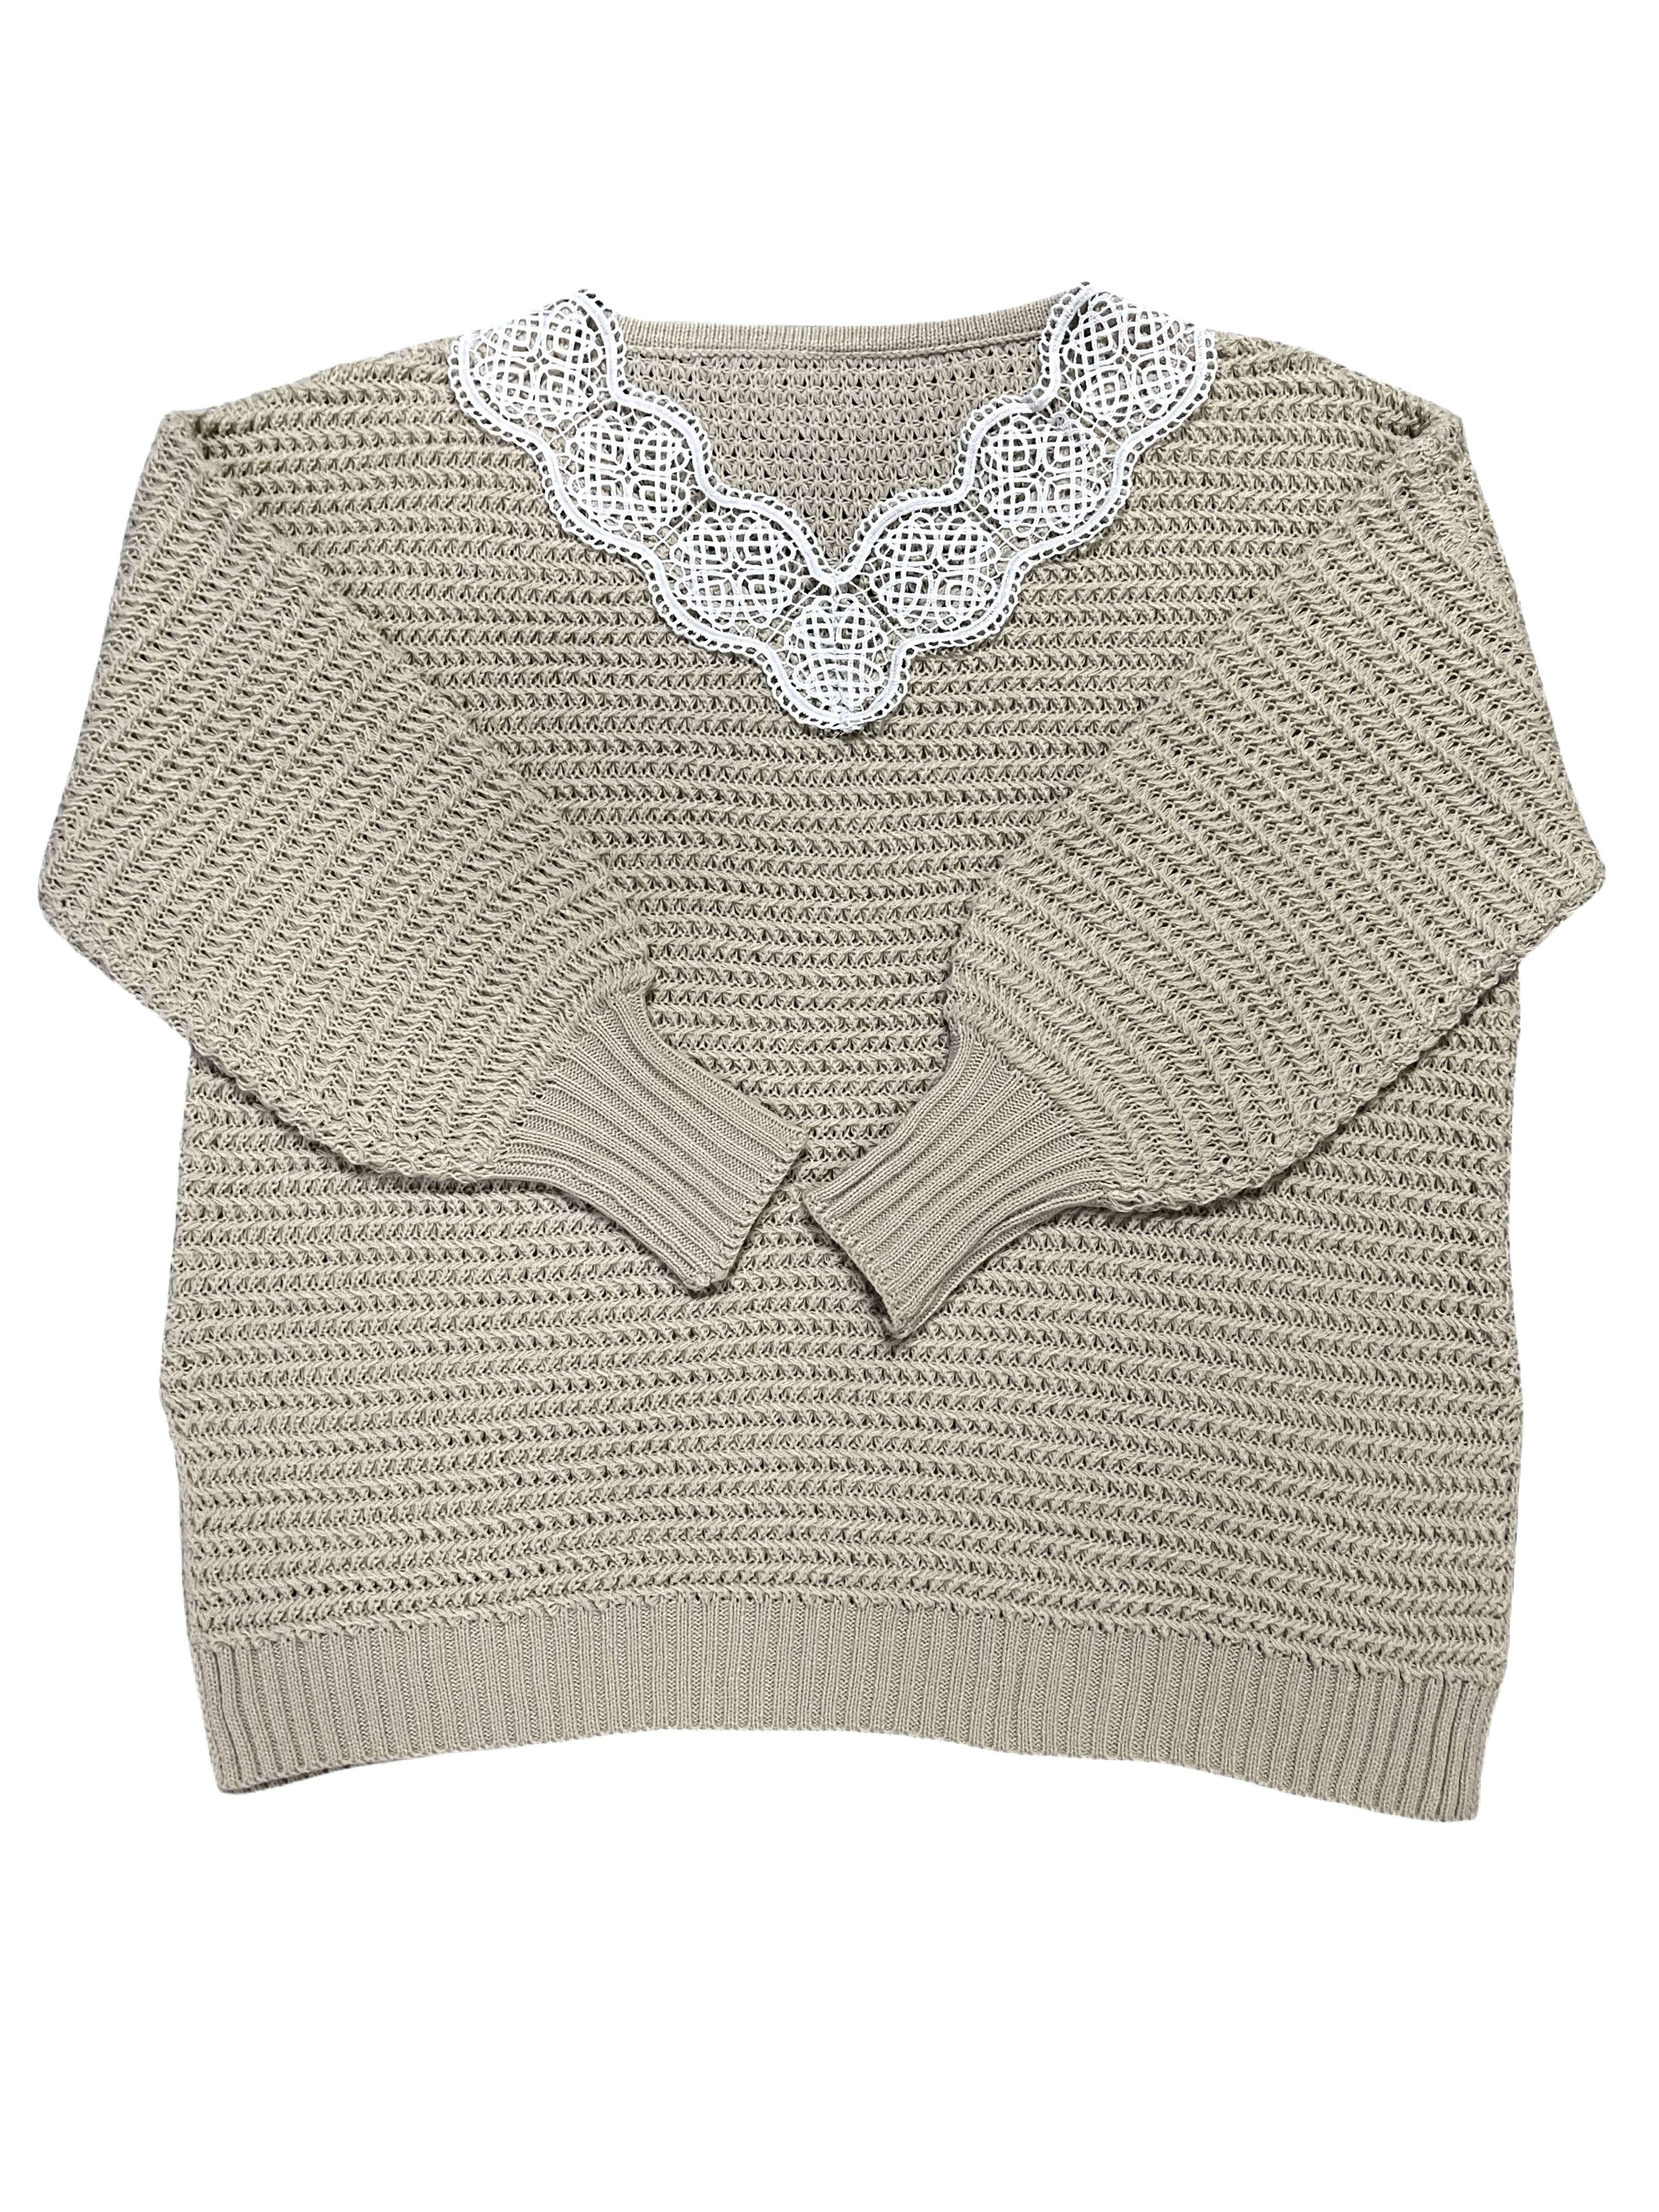 Plus Size Elegant Sweater Women's Plus Solid Knitted Contrast